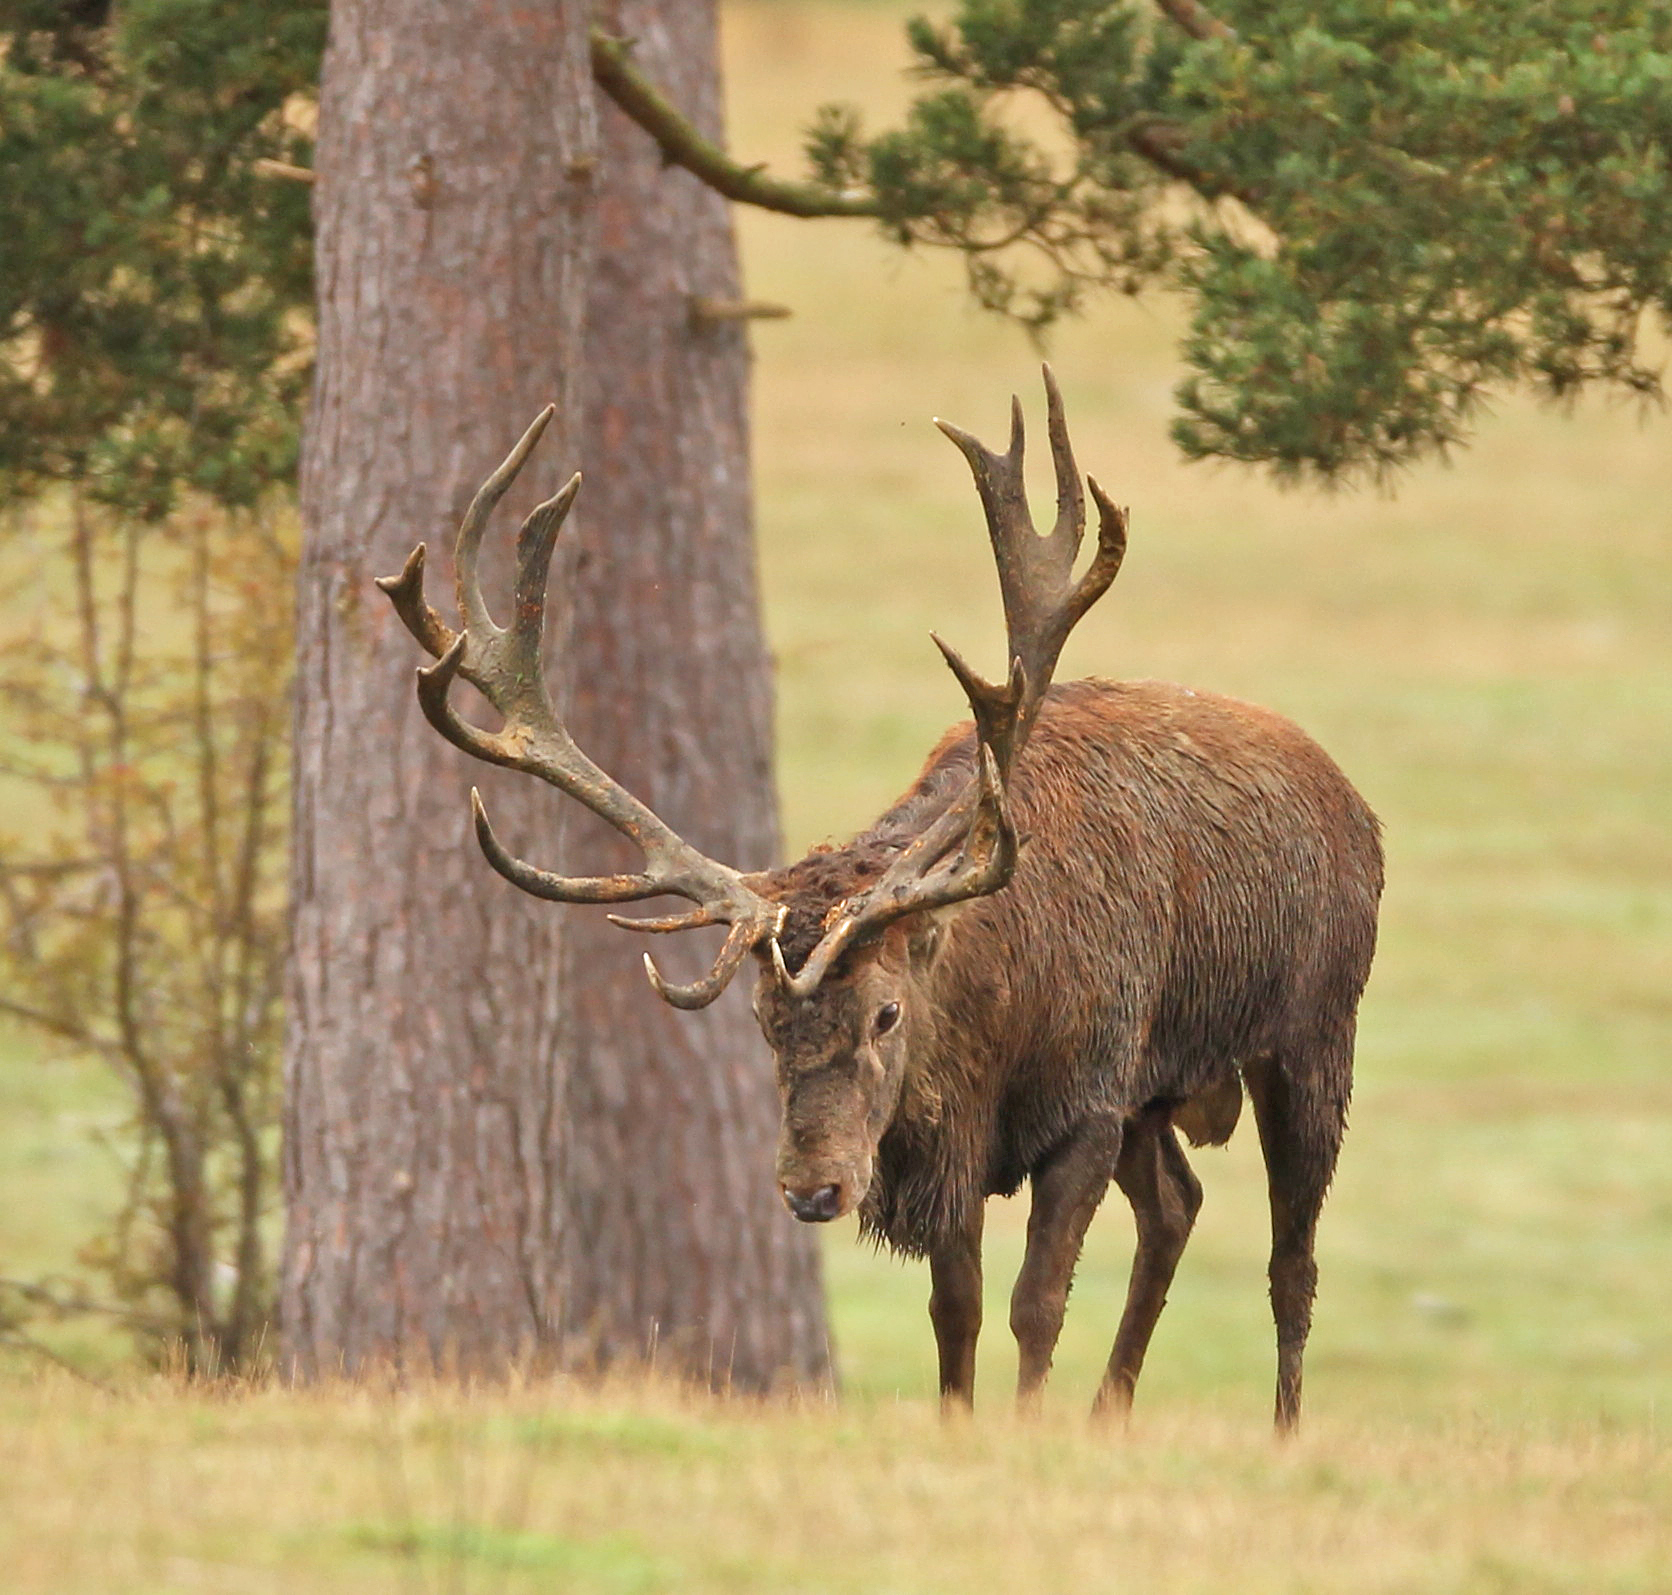 Big red stag roaring